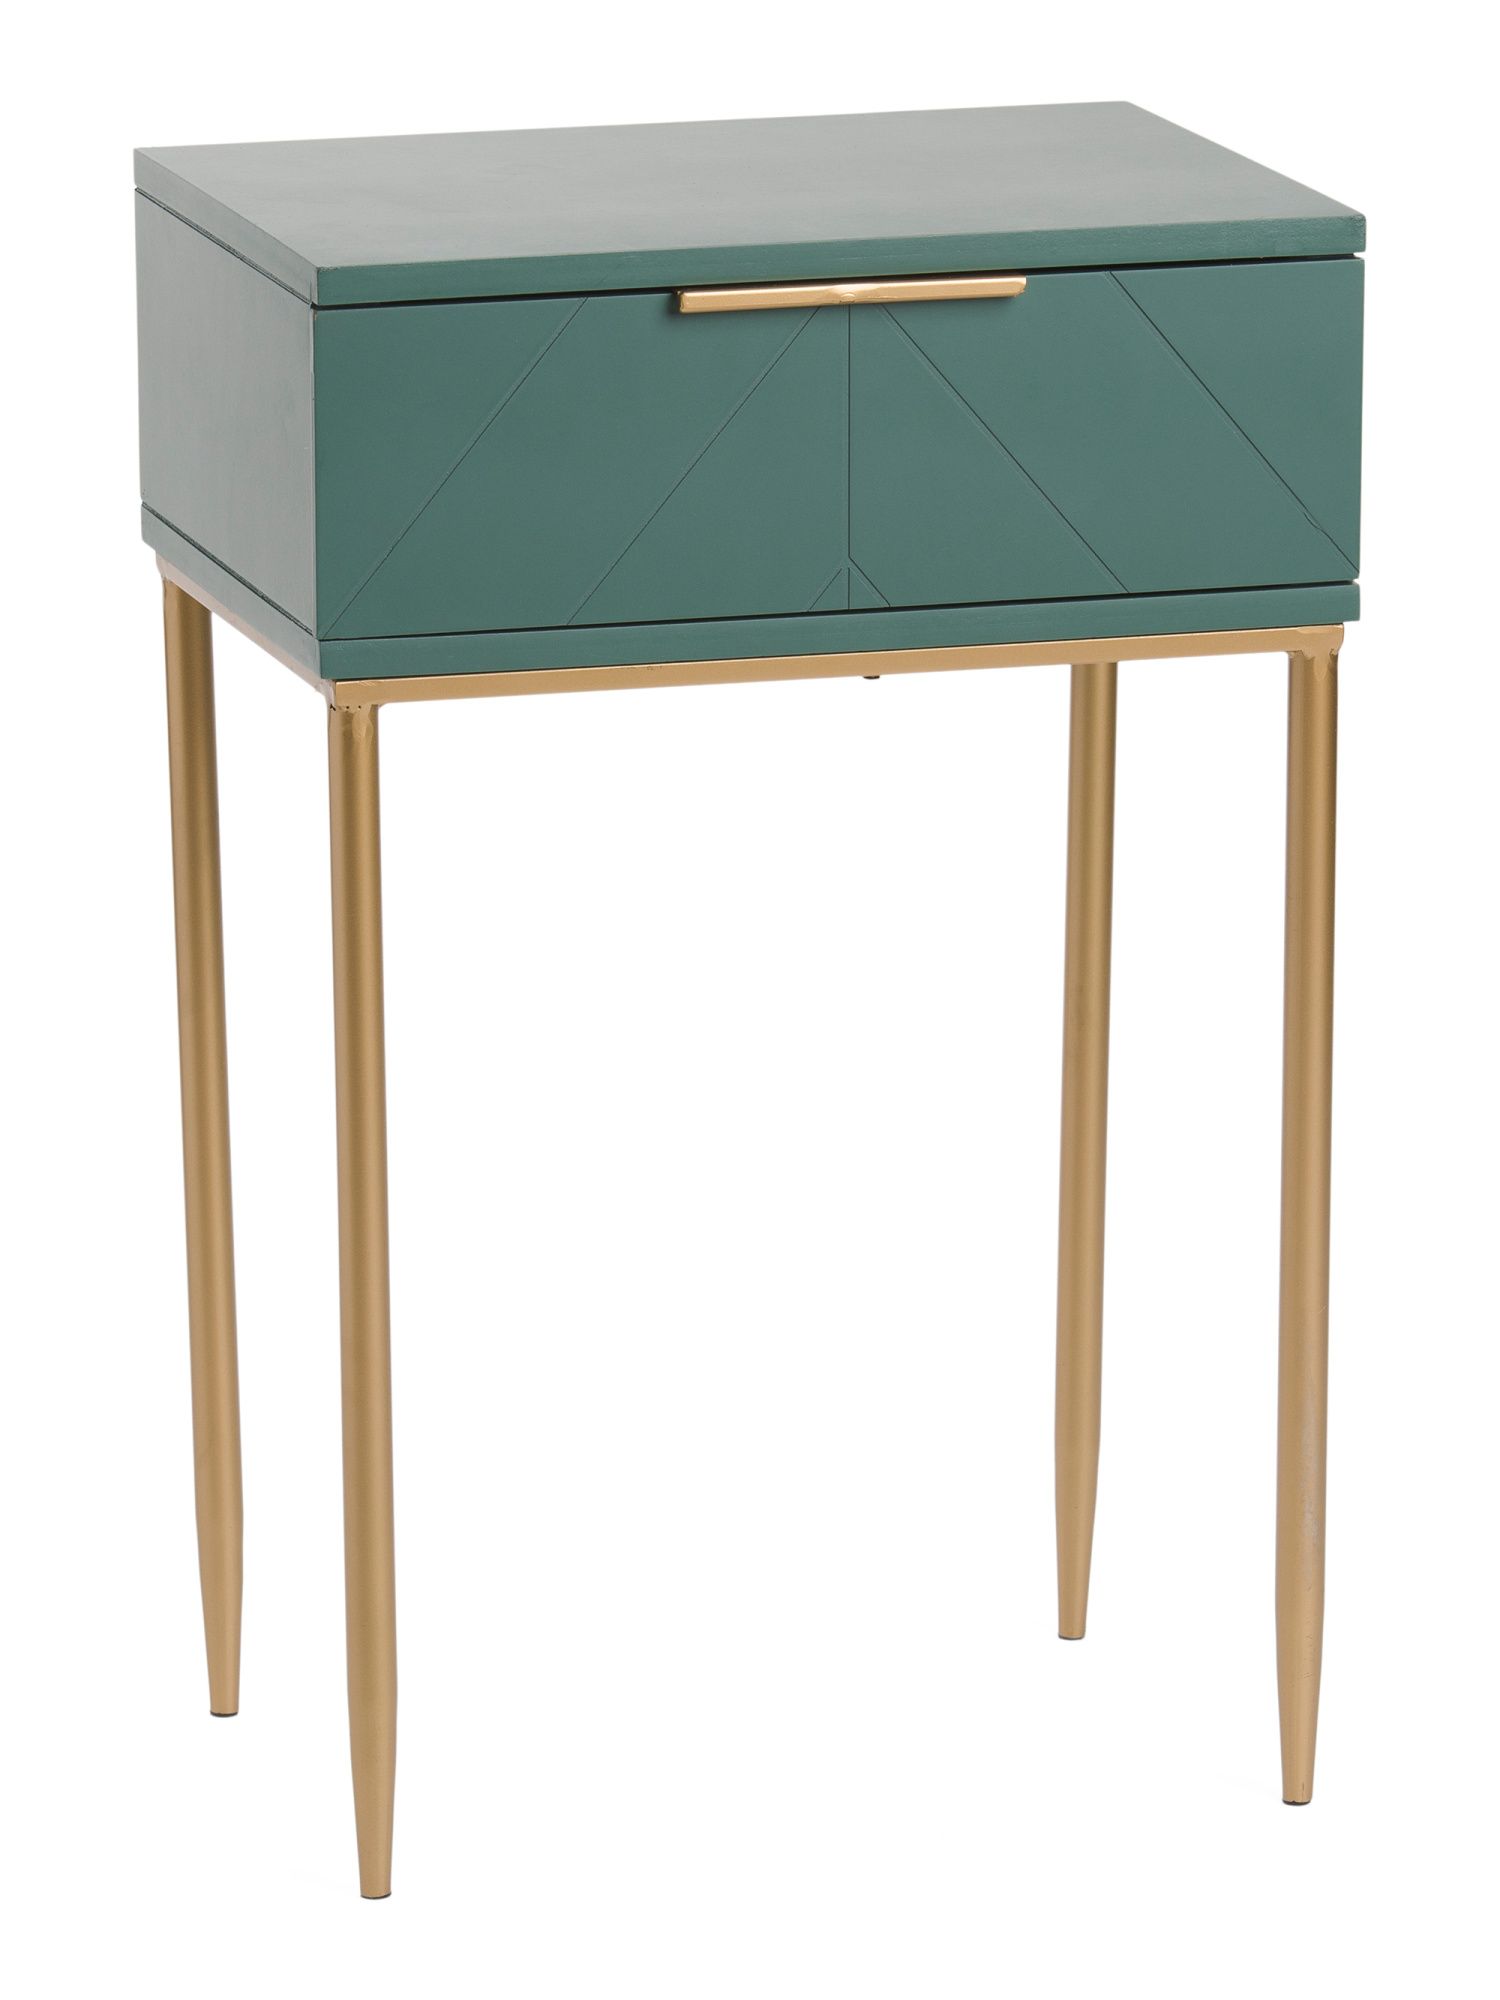 18x28 Metal And Wood Side Table With Usb Ports | TJ Maxx